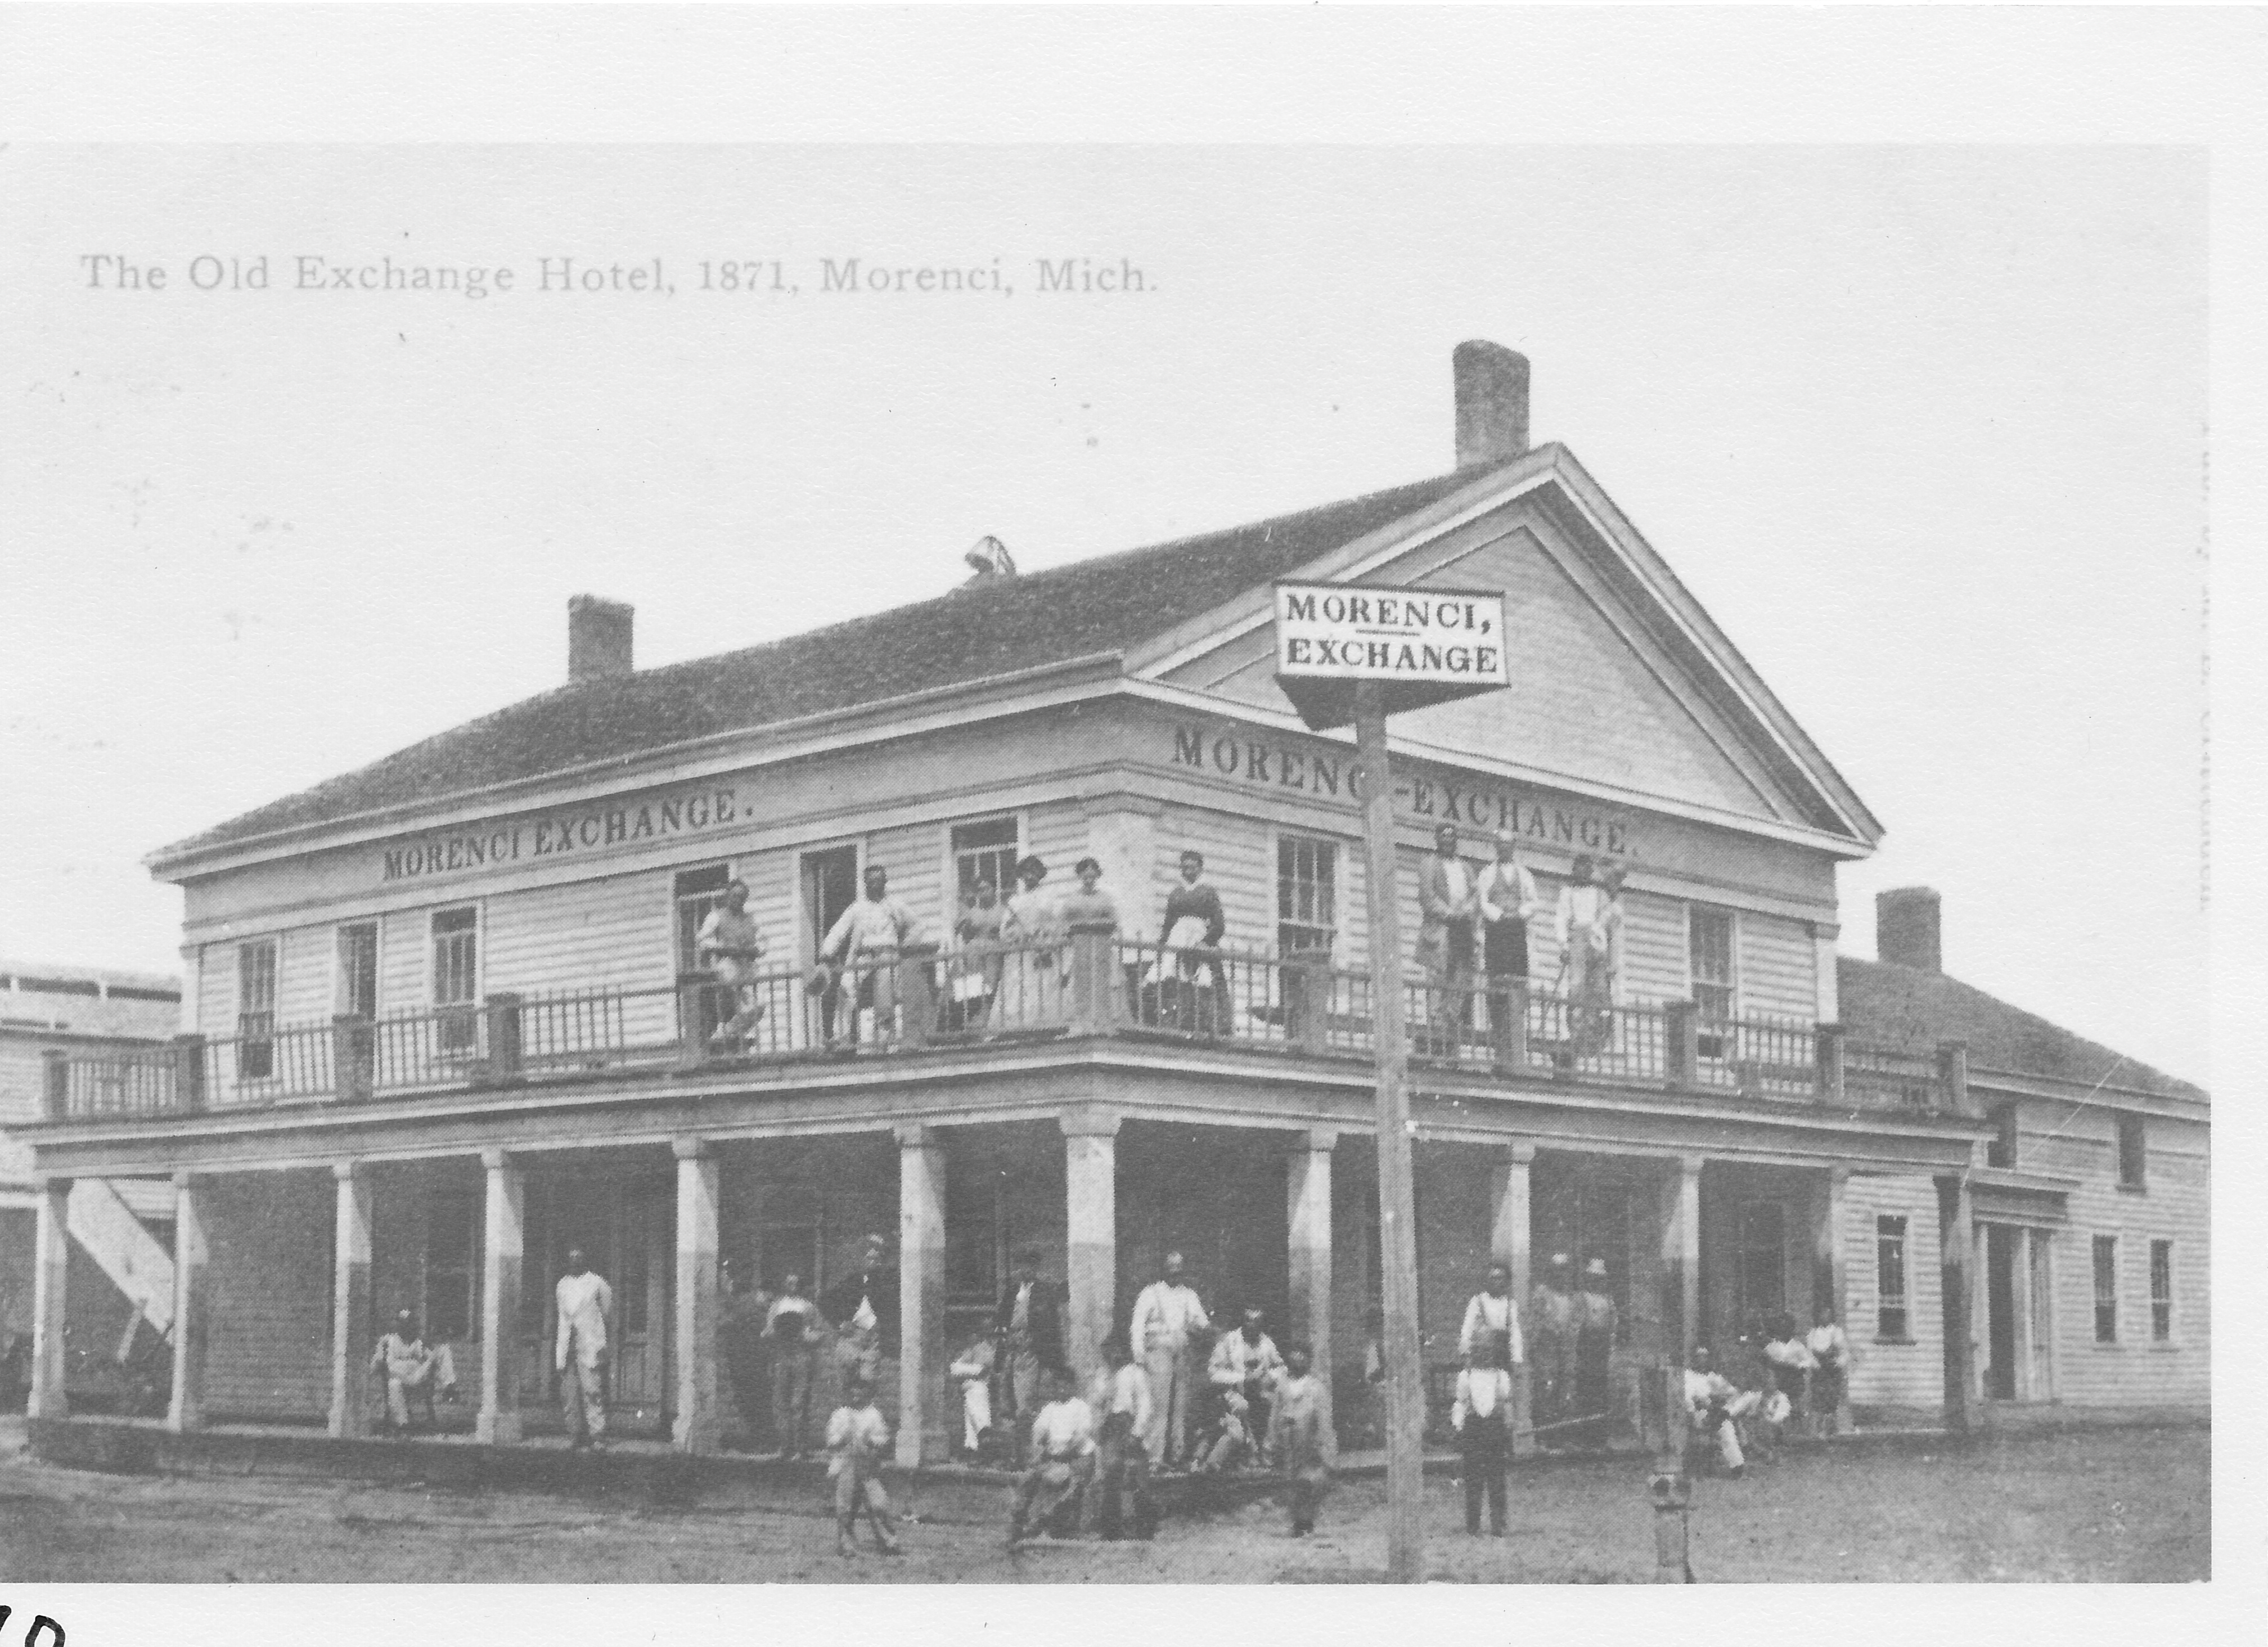 Morenci Exchange Hotel, northwest corner Main and North streets.  1871 photo.  Structure burned in 1888.